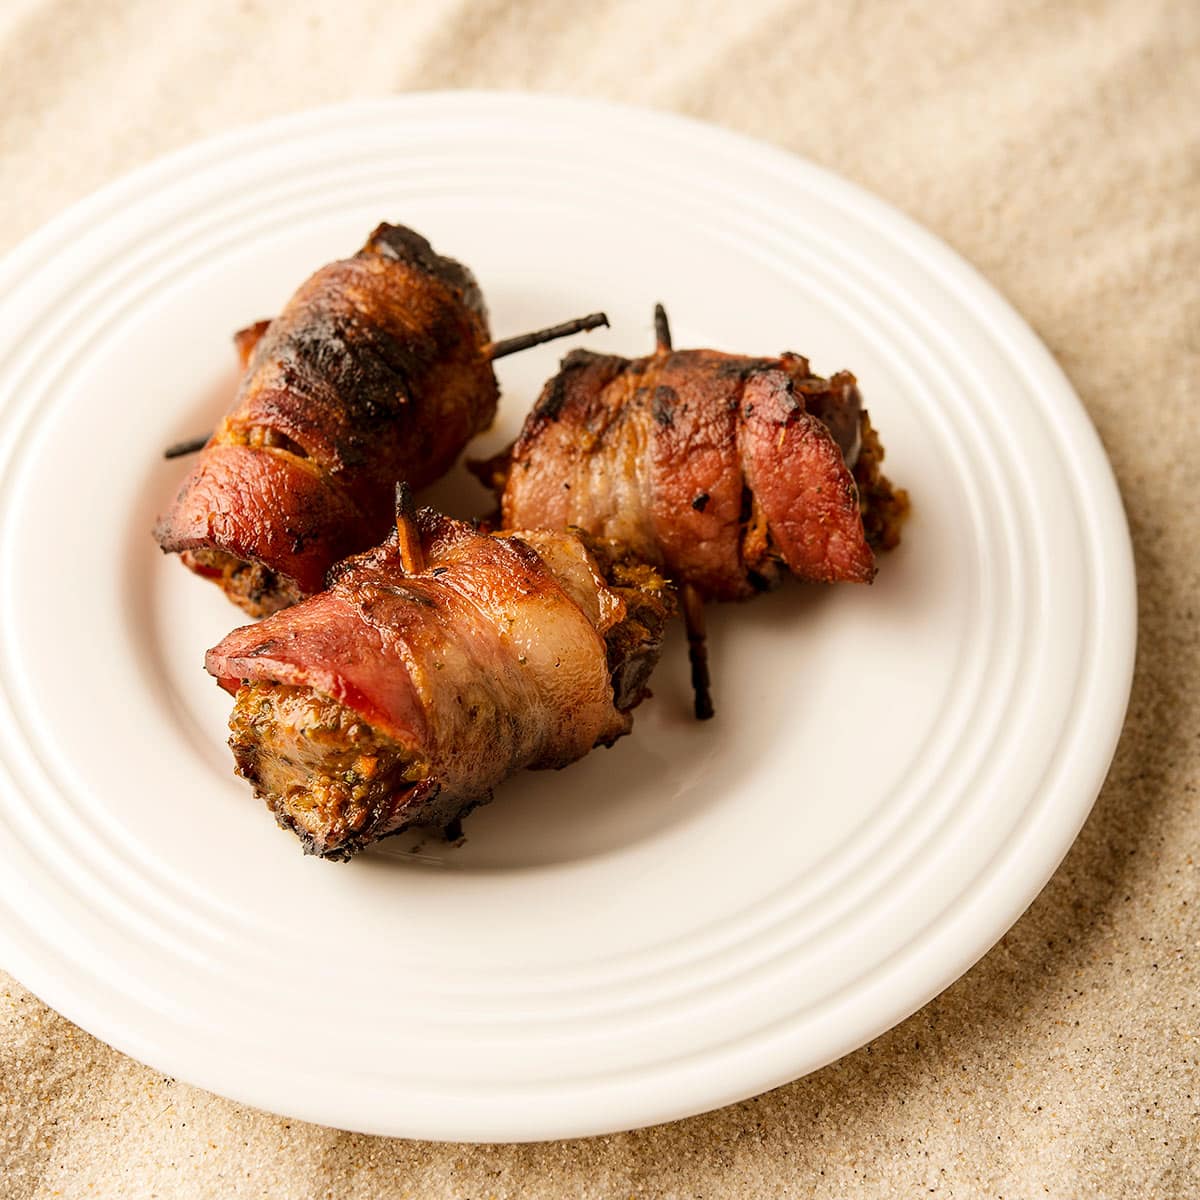 Three bacon wrapped dove breasts on a plate.